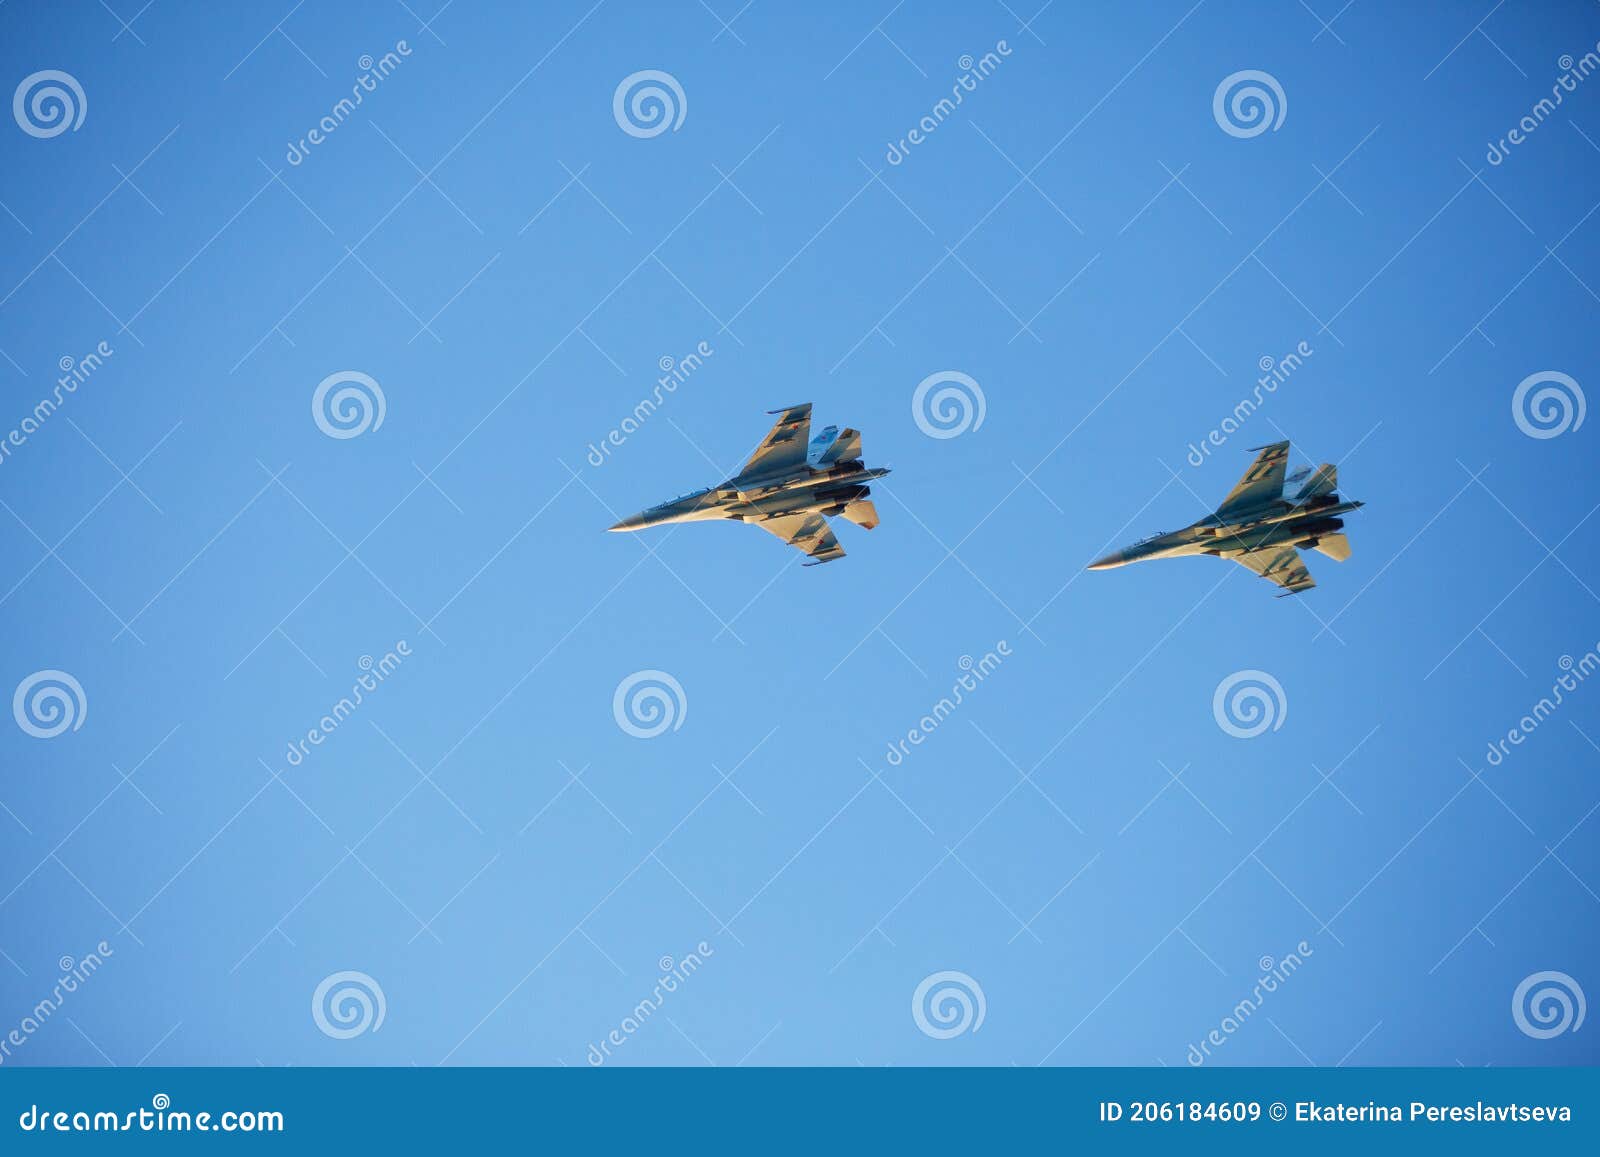 Two Military Fighter Jets Show Teamwork in the Air. Stock Image - Image ...